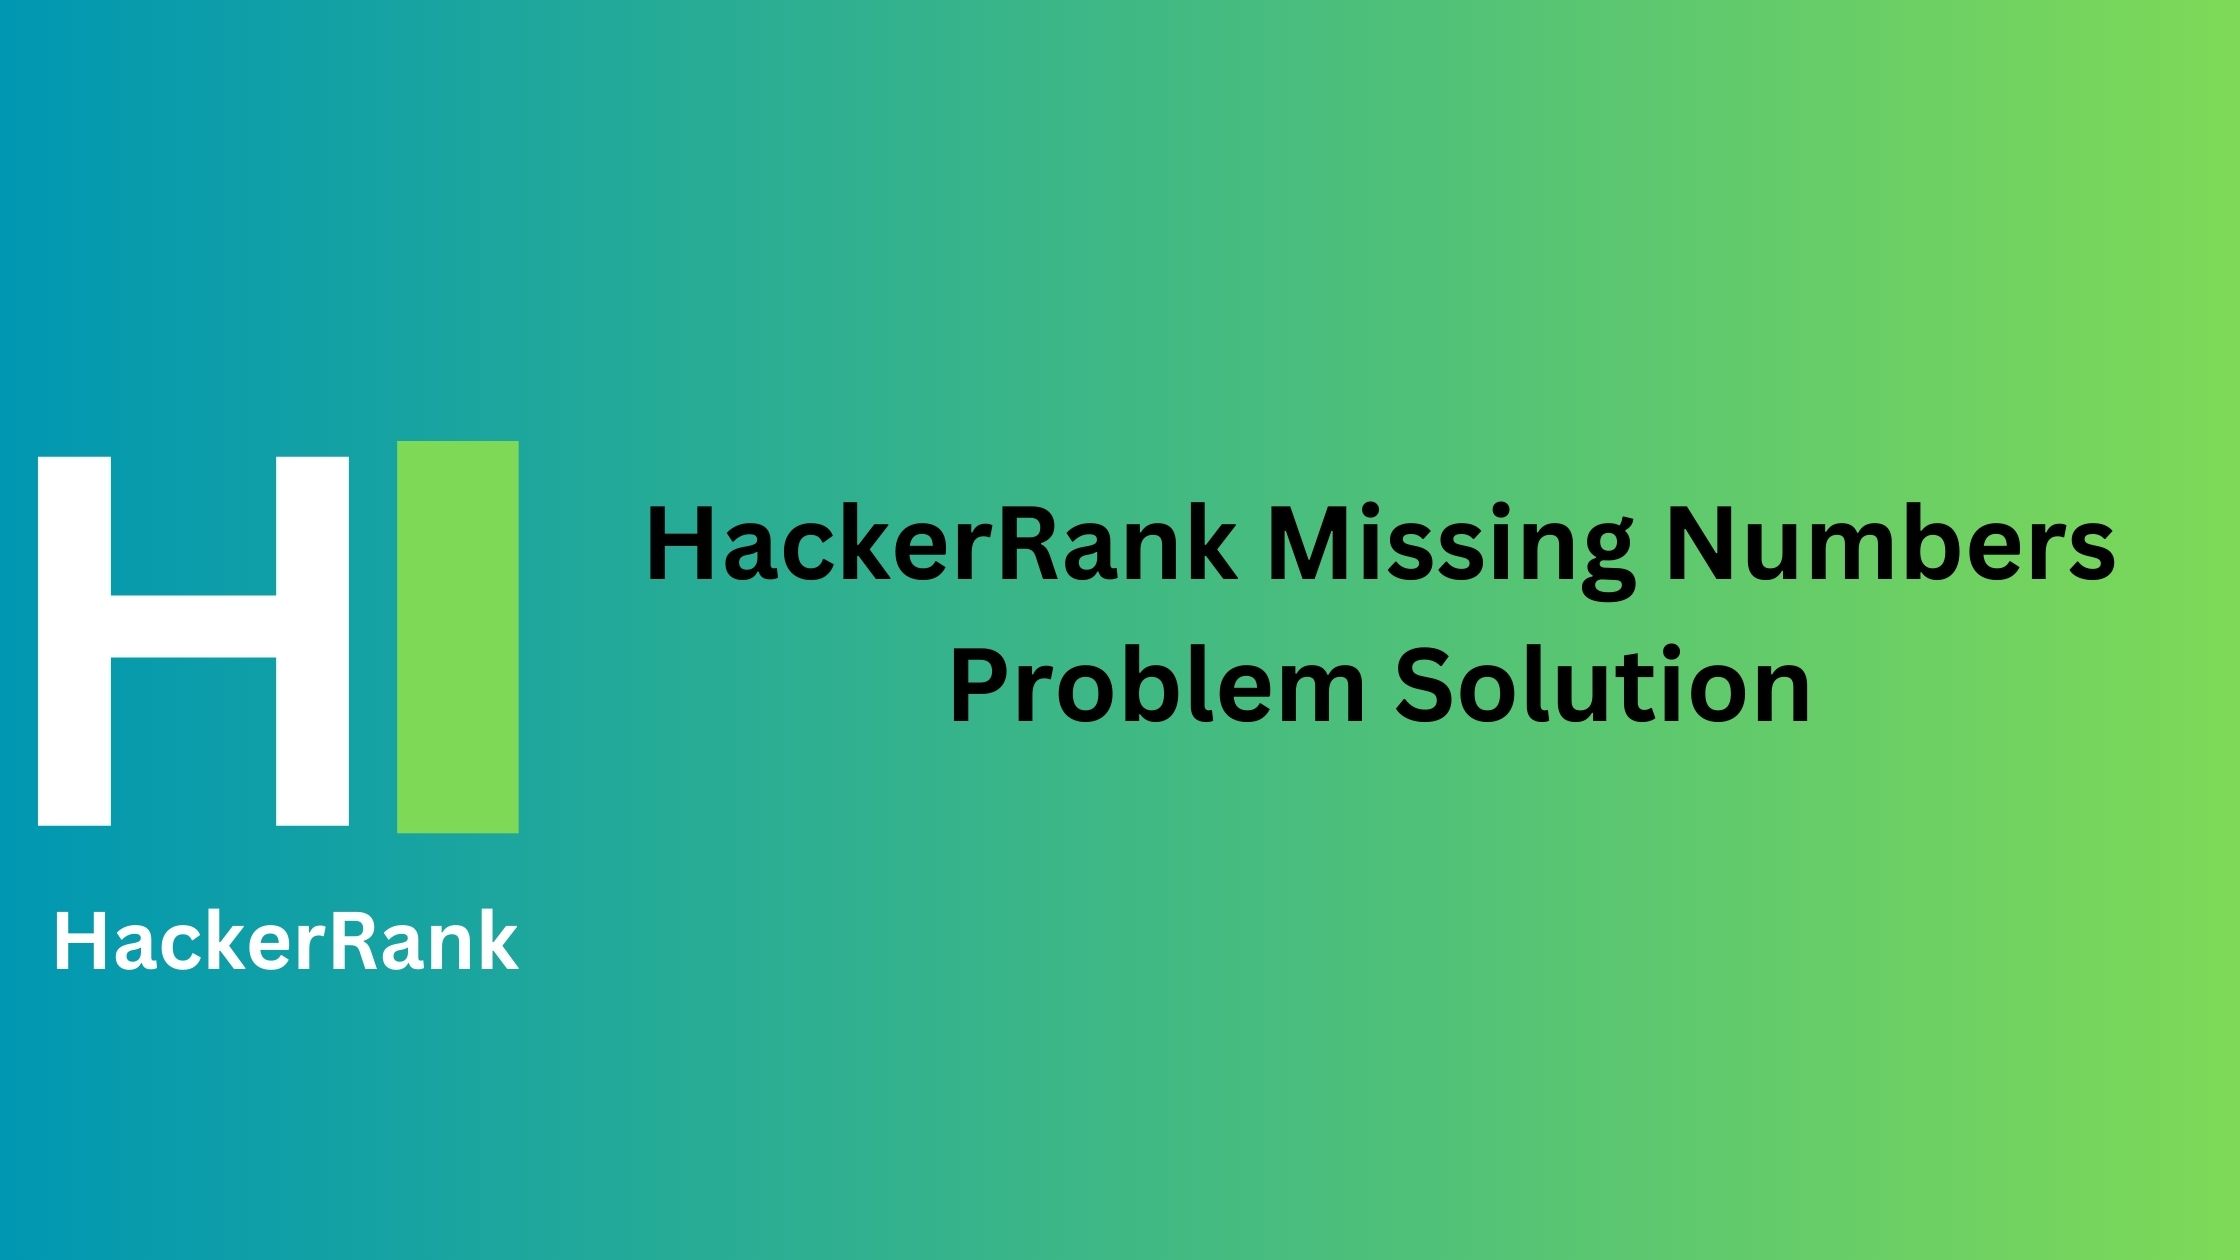 HackerRank Missing Numbers Problem Solution